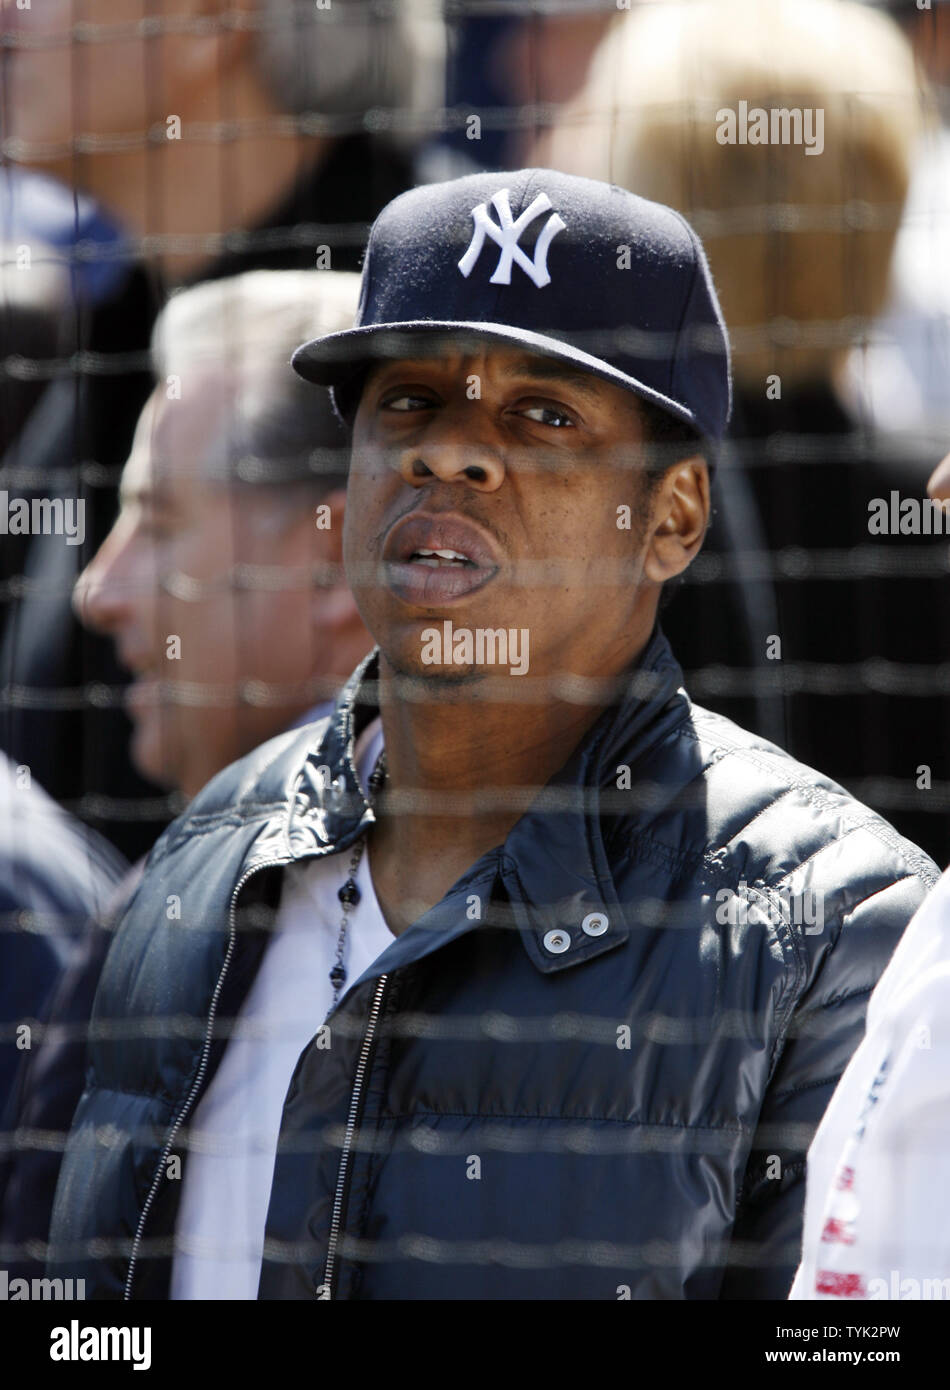 Jay-Z stands up near his seats before the New York Yankees play